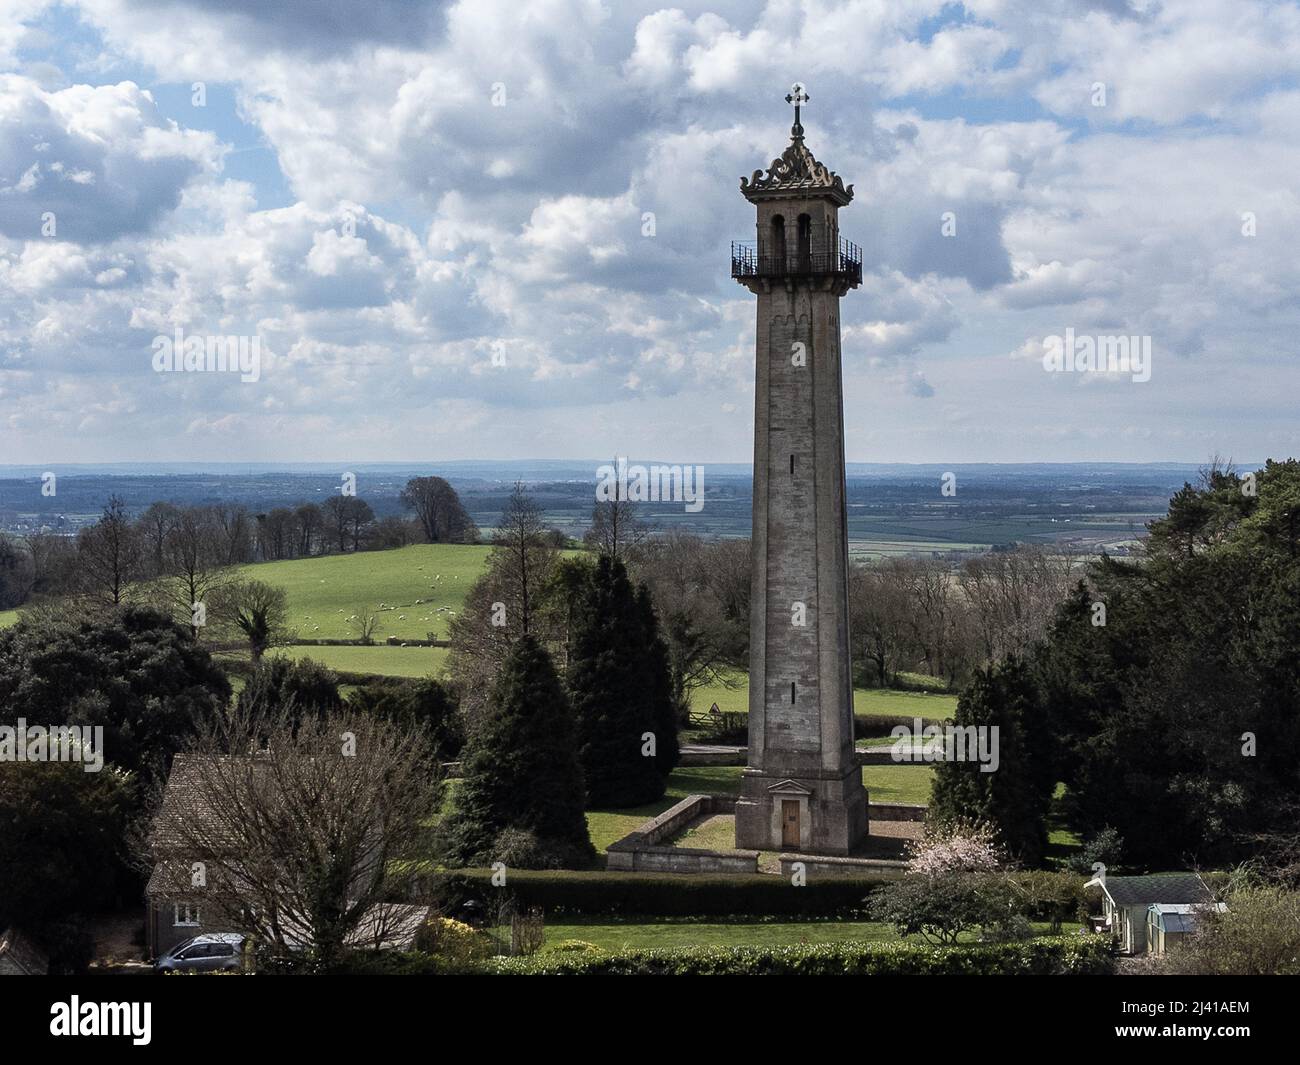 The Somerset Monument at the village of Hawkesbury Upton in South Gloucestershire. Built 1834 to commemorate Lord Robert Somerset soldier and MP. Stock Photo